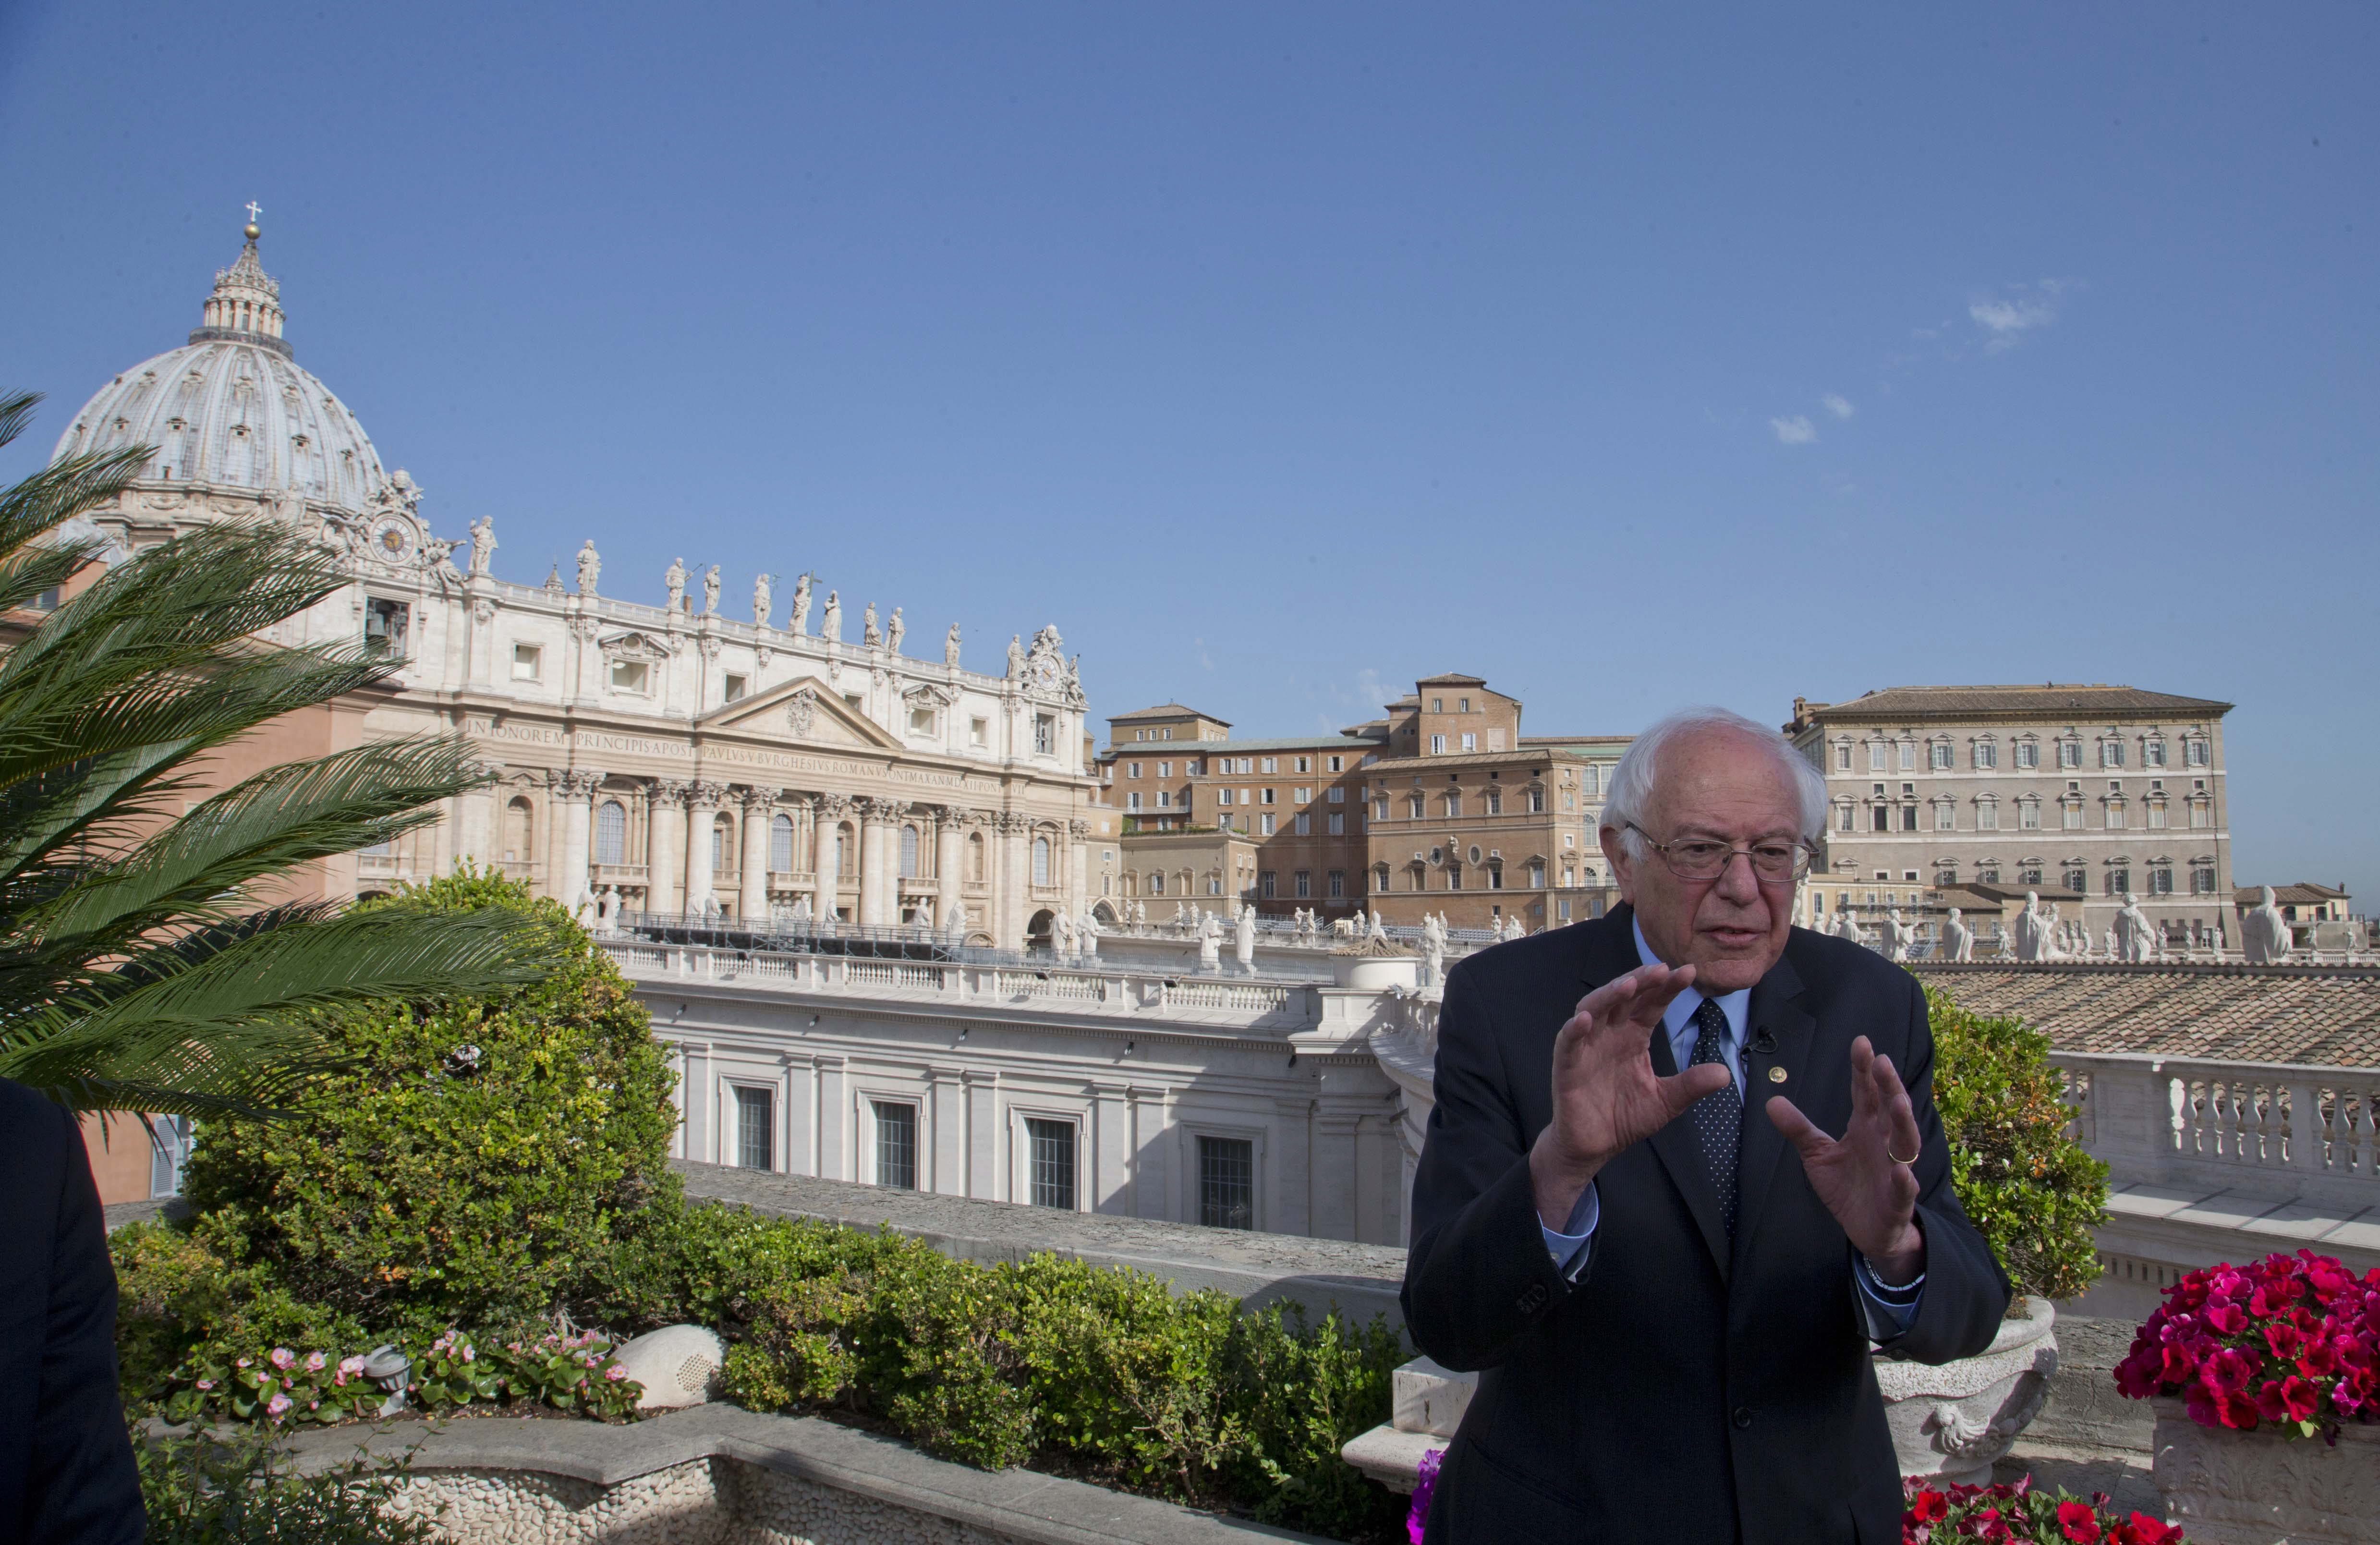 US presidential candidate Bernie Sanders, backdropped by St. Peter's Basilica, talks during an interview with the Associated Press, at the Vatican Saturday, April 16, 2016. Democratic presidential candidate Bernie Sanders says in an interview with The Associated Press that he met with Pope Francis. Sanders says the meeting took place Saturday morning before the pope left for his one-day visit to Greece. He says he was honored by the meeting, and that he told the pope he appreciated the message that he is sending the world about the need to inject morality and justice into the world economy.